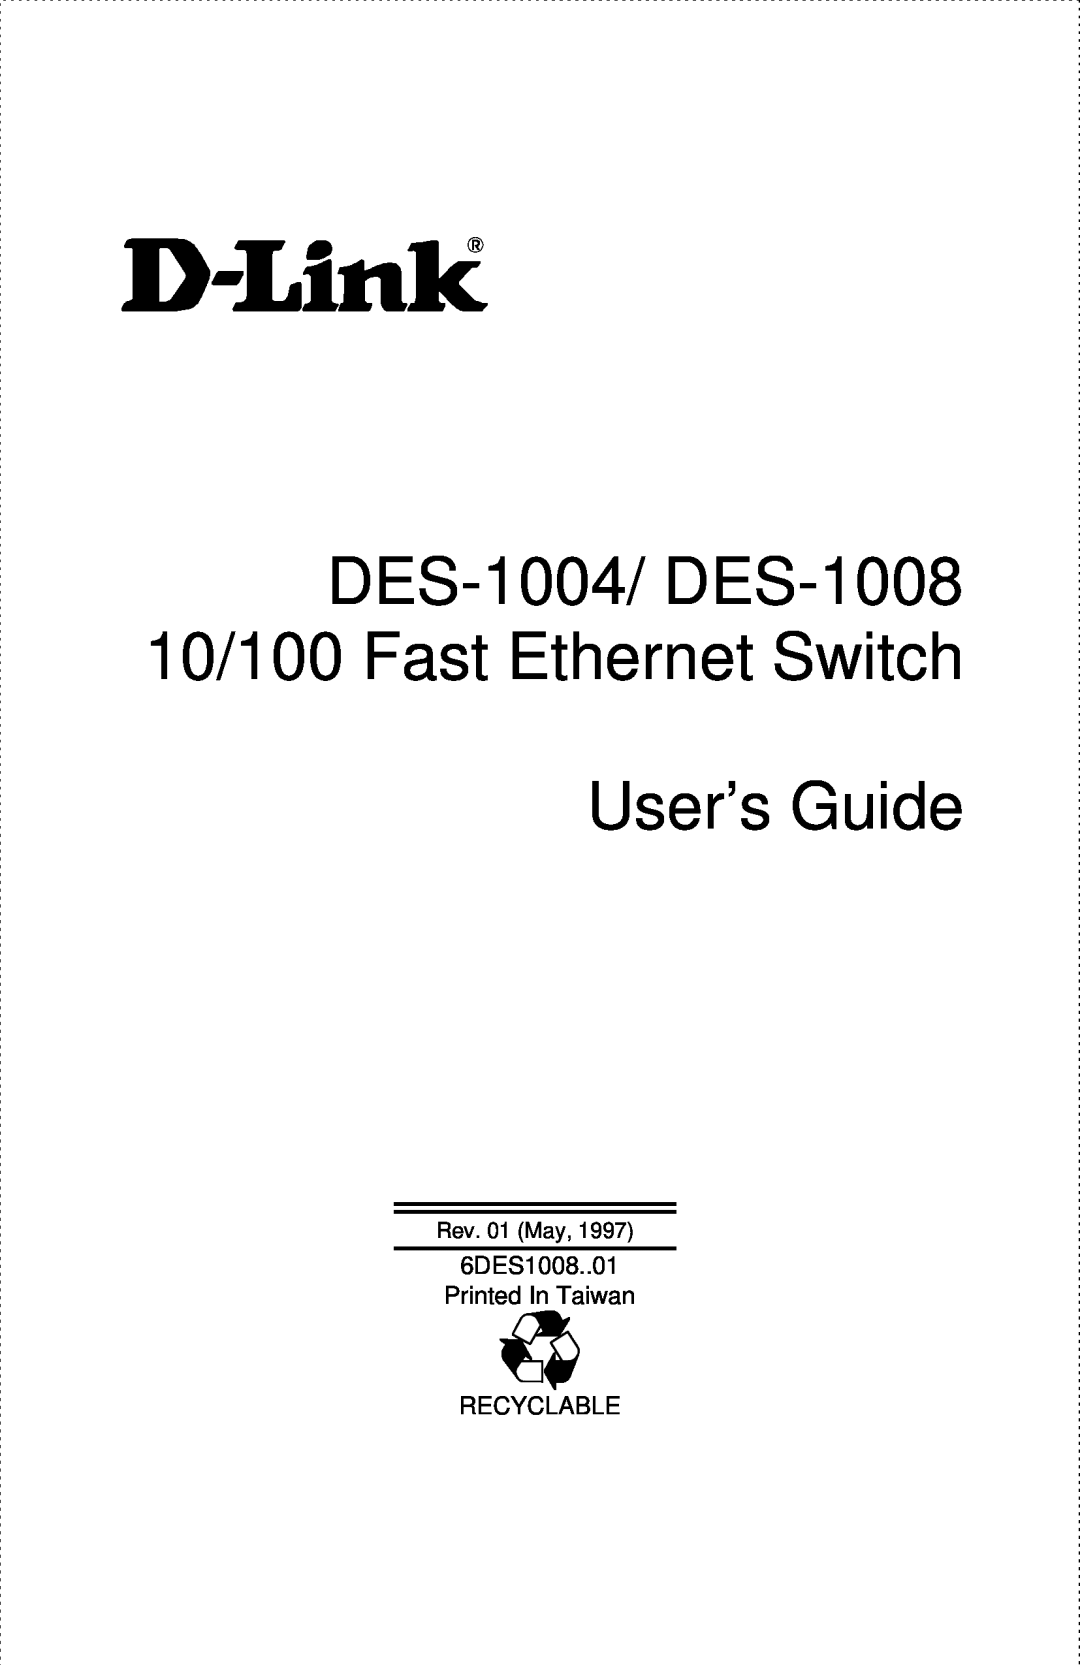 D-Link manual DES-1004/ DES-1008 10/100 Fast Ethernet Switch User’s Guide, 6DES1008..01 Printed In Taiwan, Recyclable 